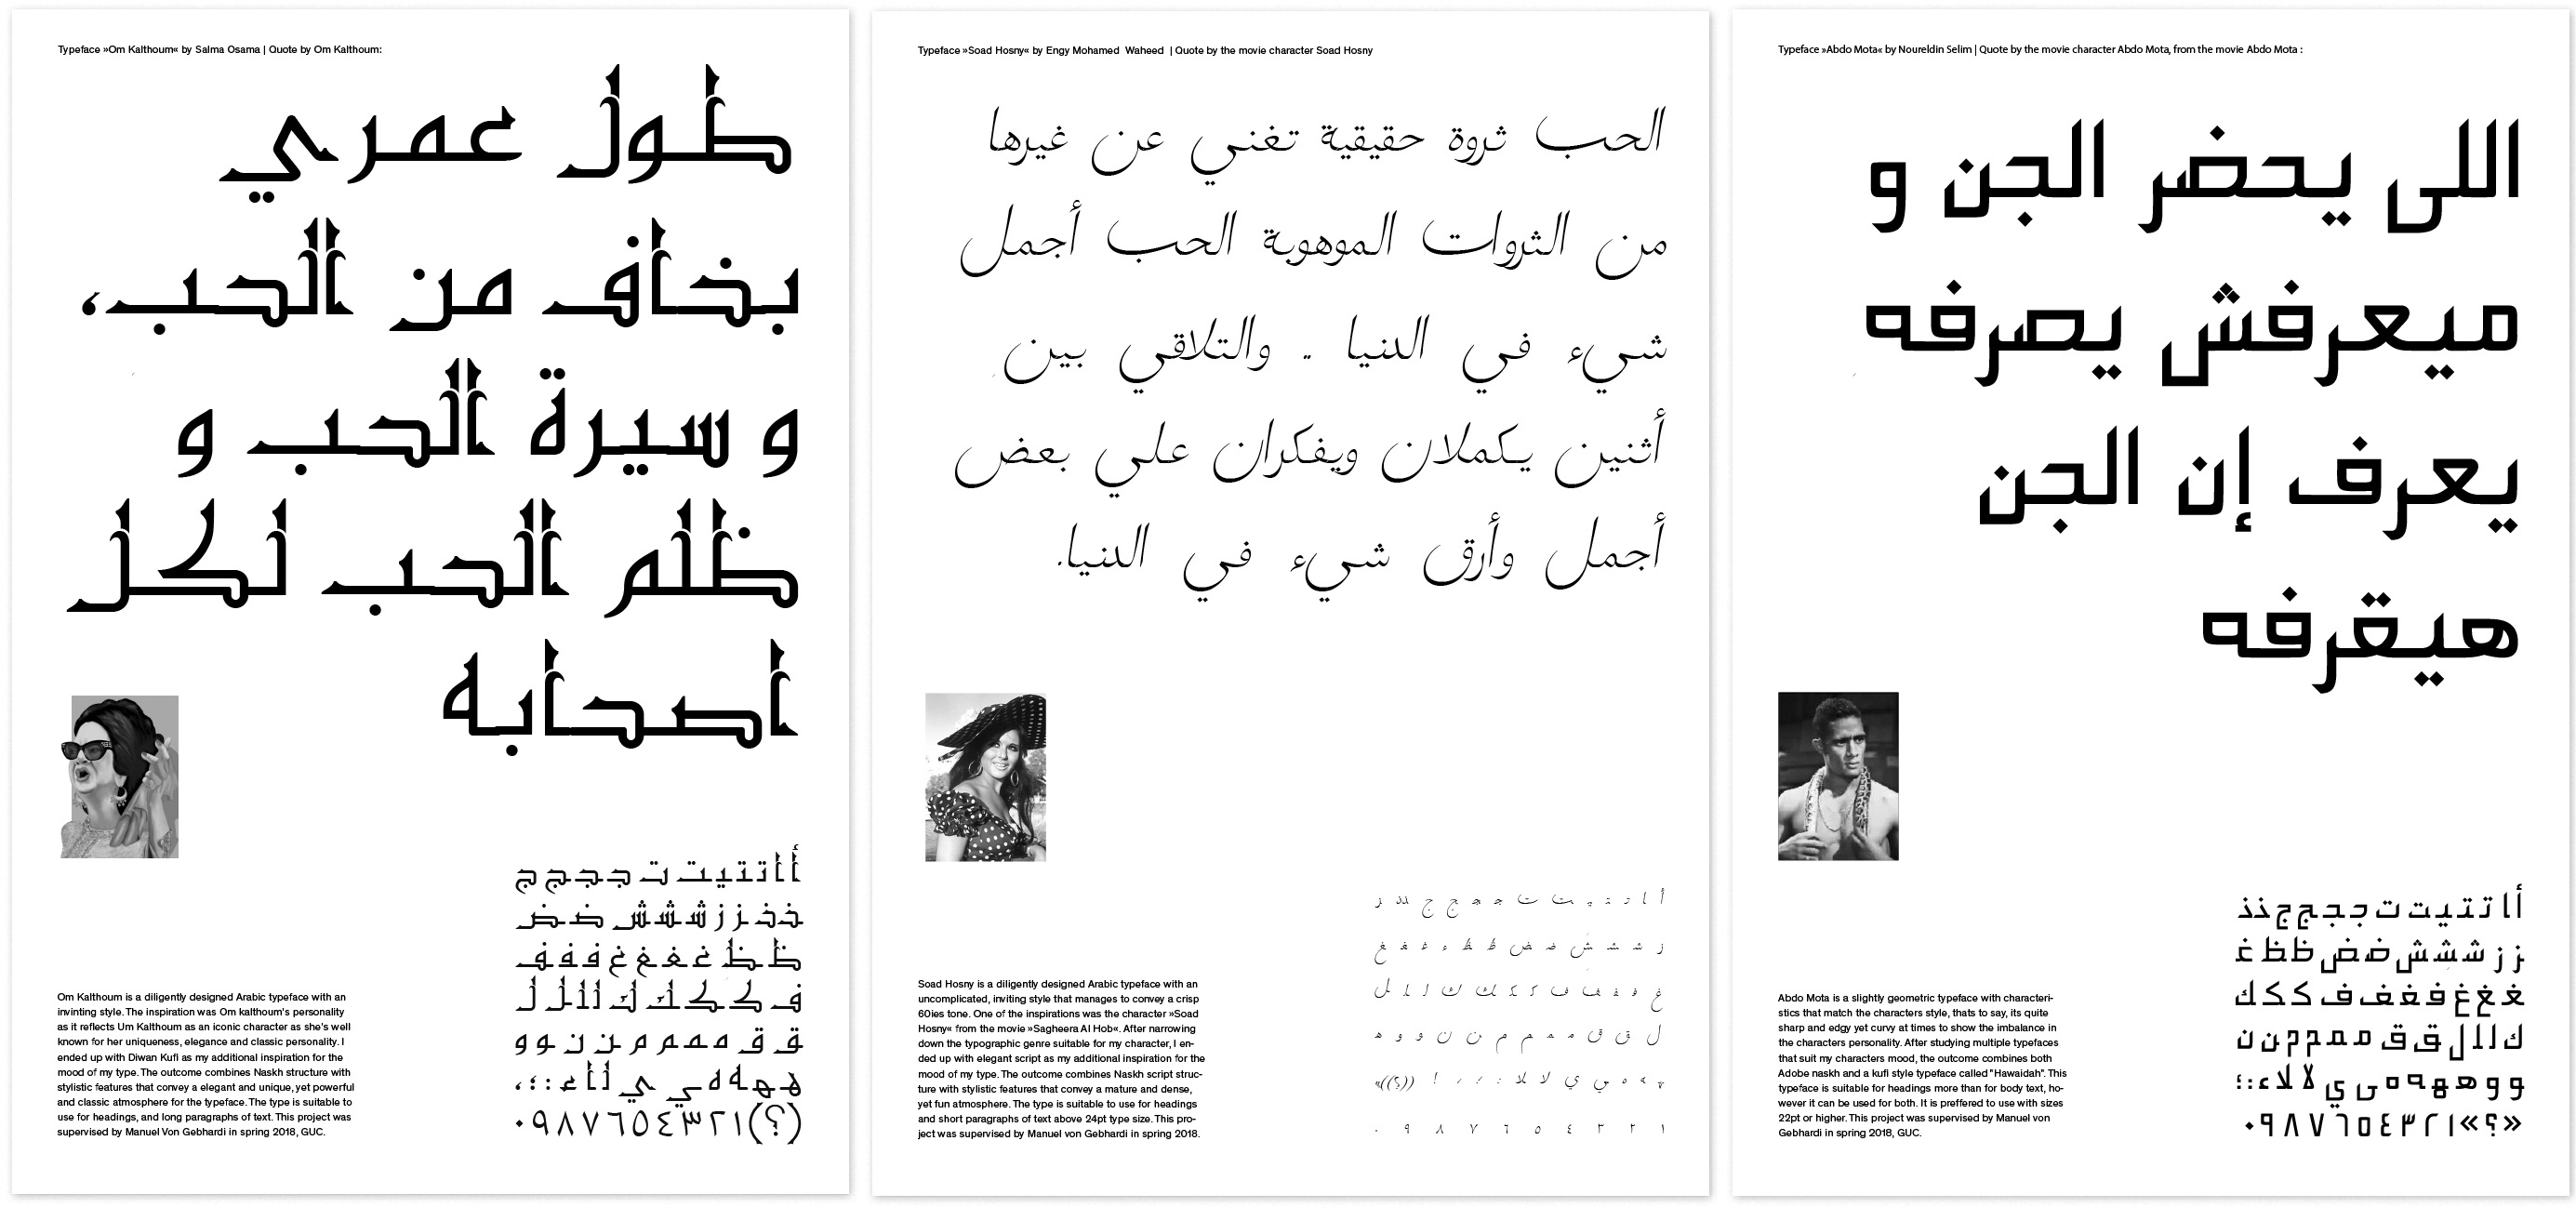 Cairo-Arabic-Type-Design-SS2018-Supervised-by-Manuel-3